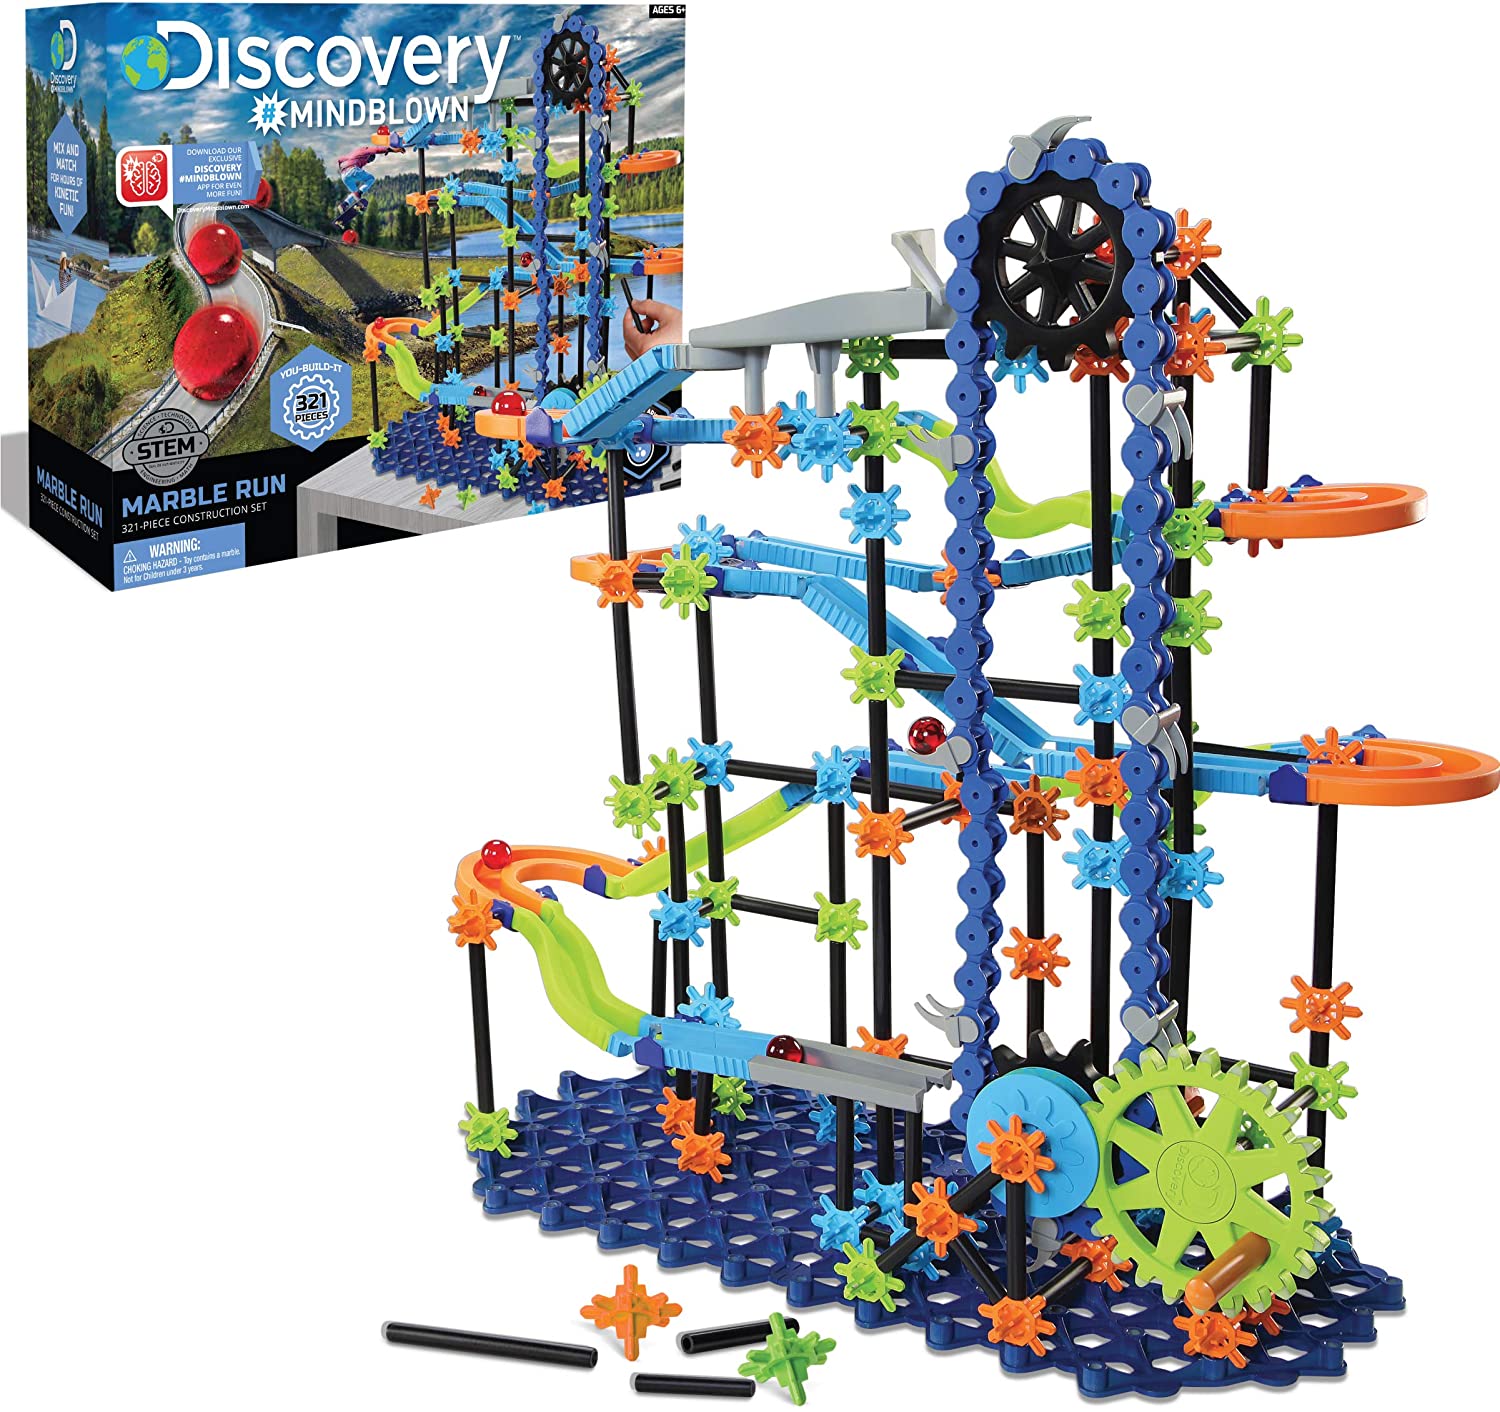 321-Piece Discovery Mindblown Toy Marble Run Construction Set $24